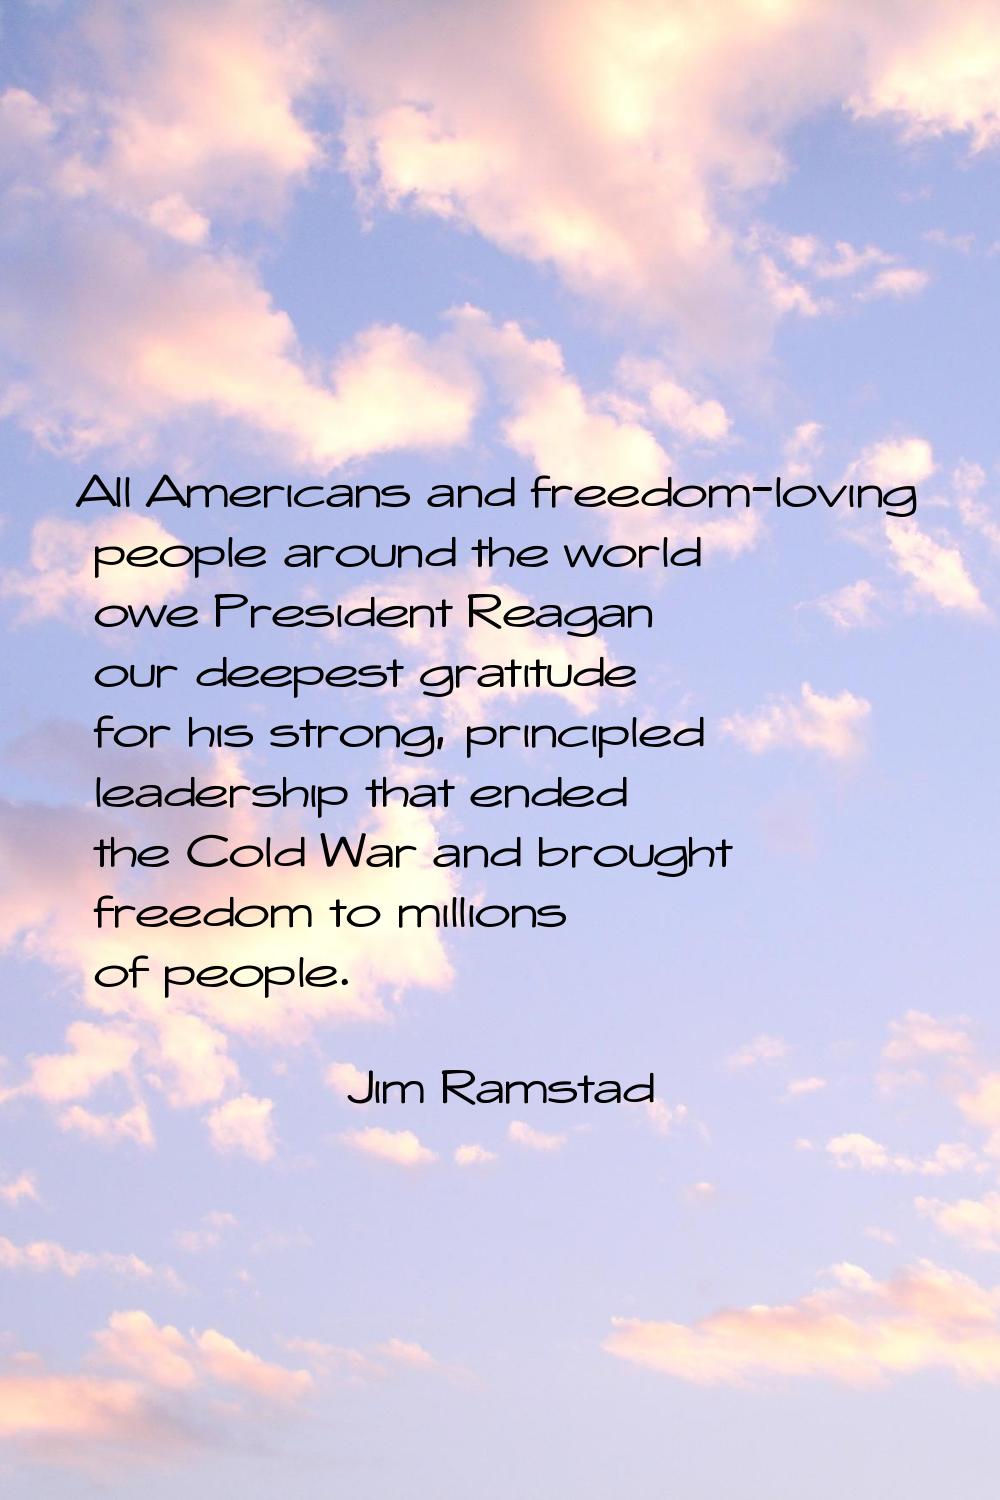 All Americans and freedom-loving people around the world owe President Reagan our deepest gratitude